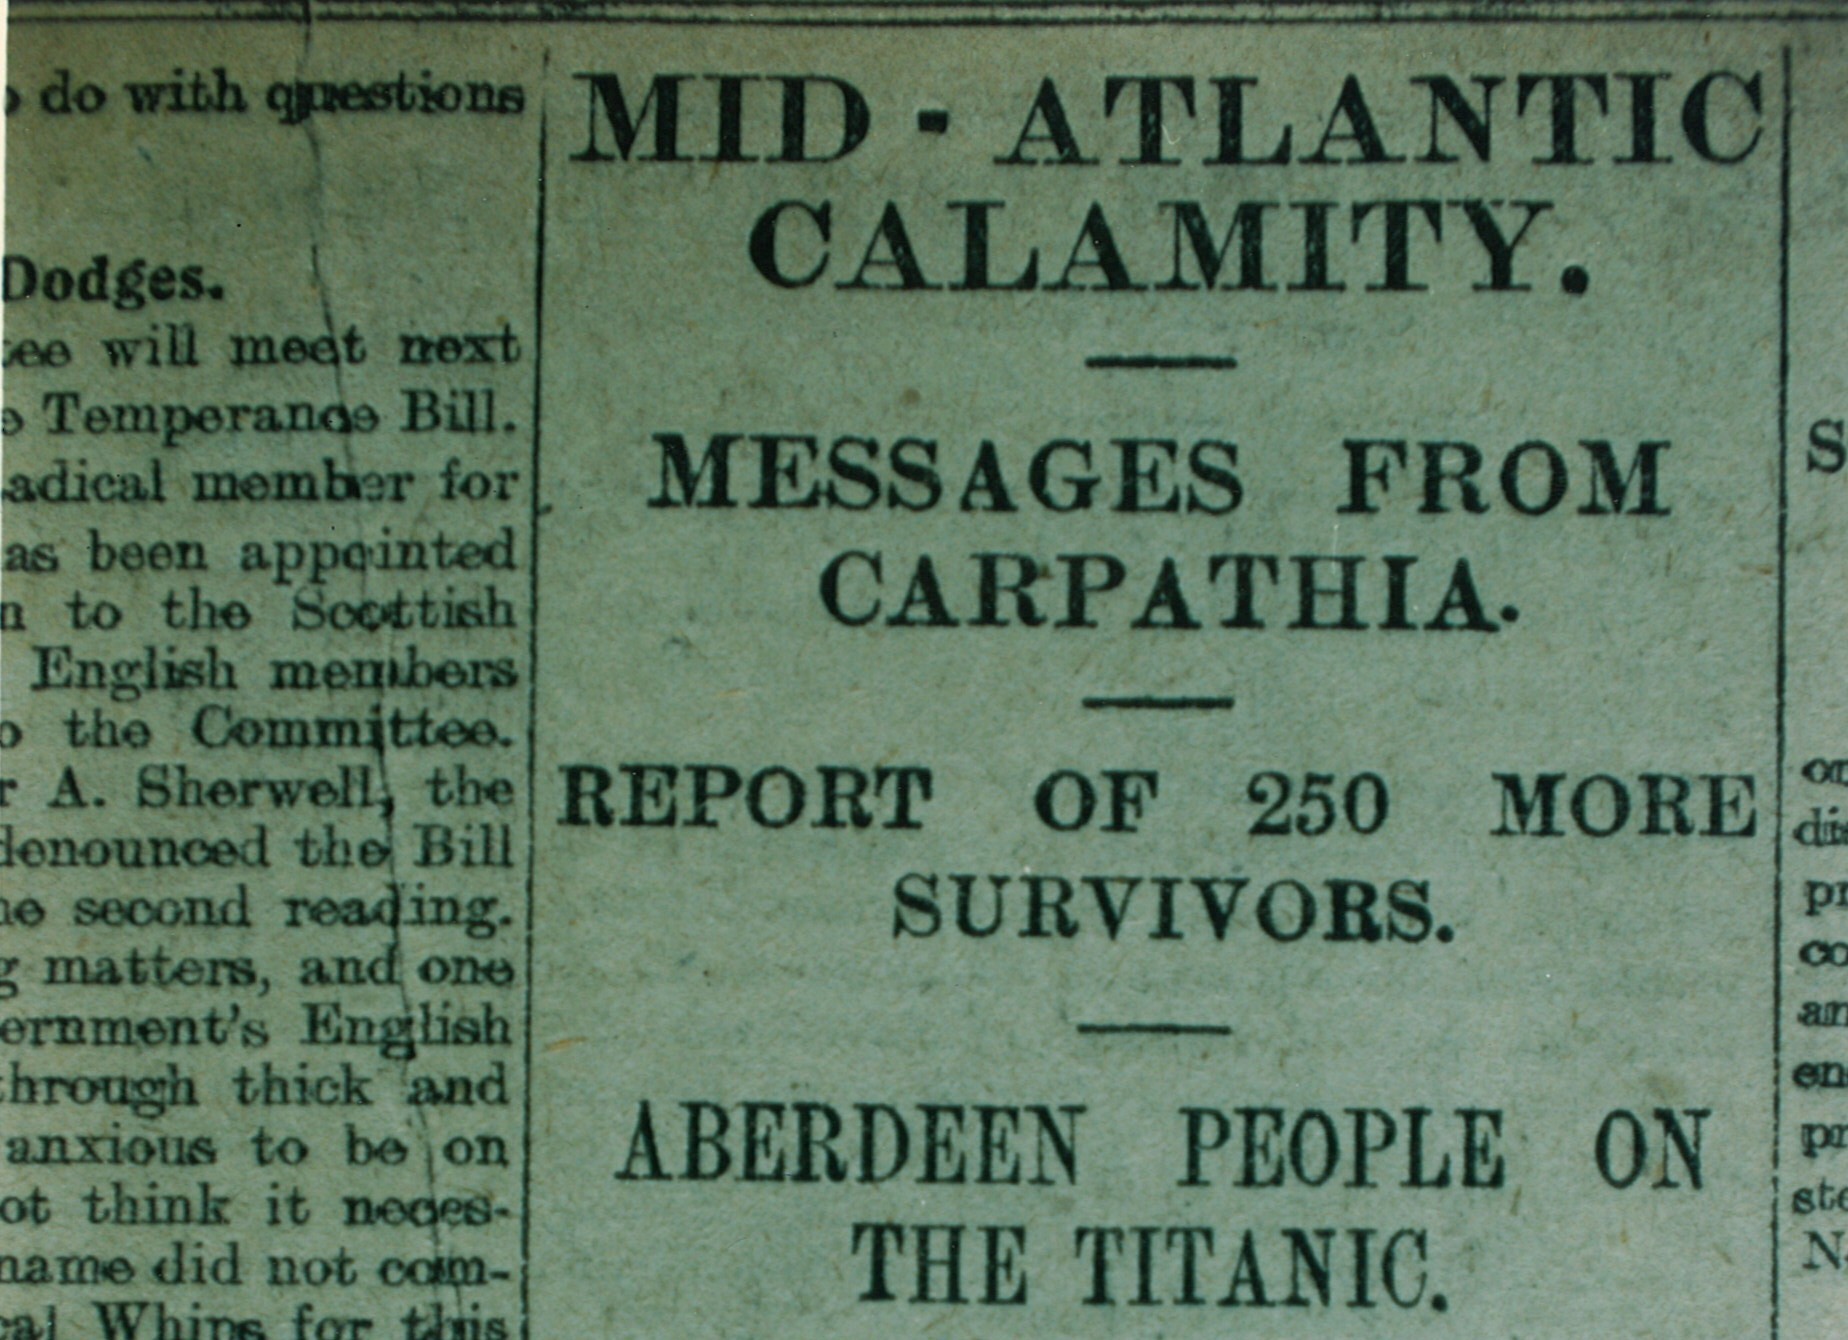 The Press and Journal's front page the Thursday after the Titanic disaster is the only piece of coverage that could have lead to the well-versed myth